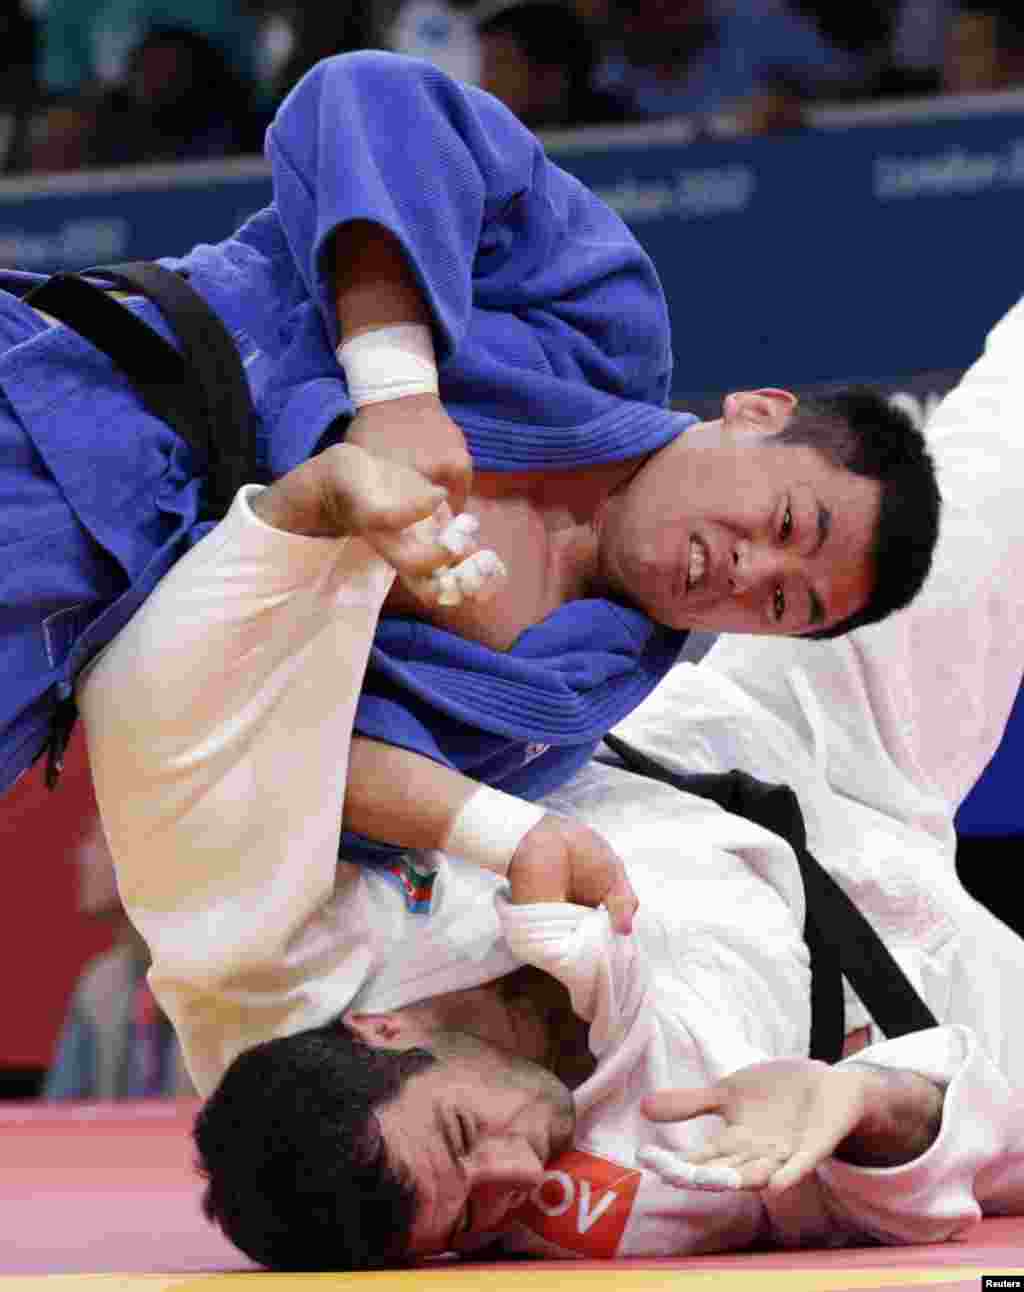 Azerbaijan's Elkhan Mammadov fights with South Korea's Song Dae-Nam (blue) during their men's -90kg elimination round of 16 judo match at the London 2012 Olympic Games August 1, 2012. REUTERS/Toru Hanai (BRITAIN - Tags: SPORT OLYMPICS SPORT JUDO)